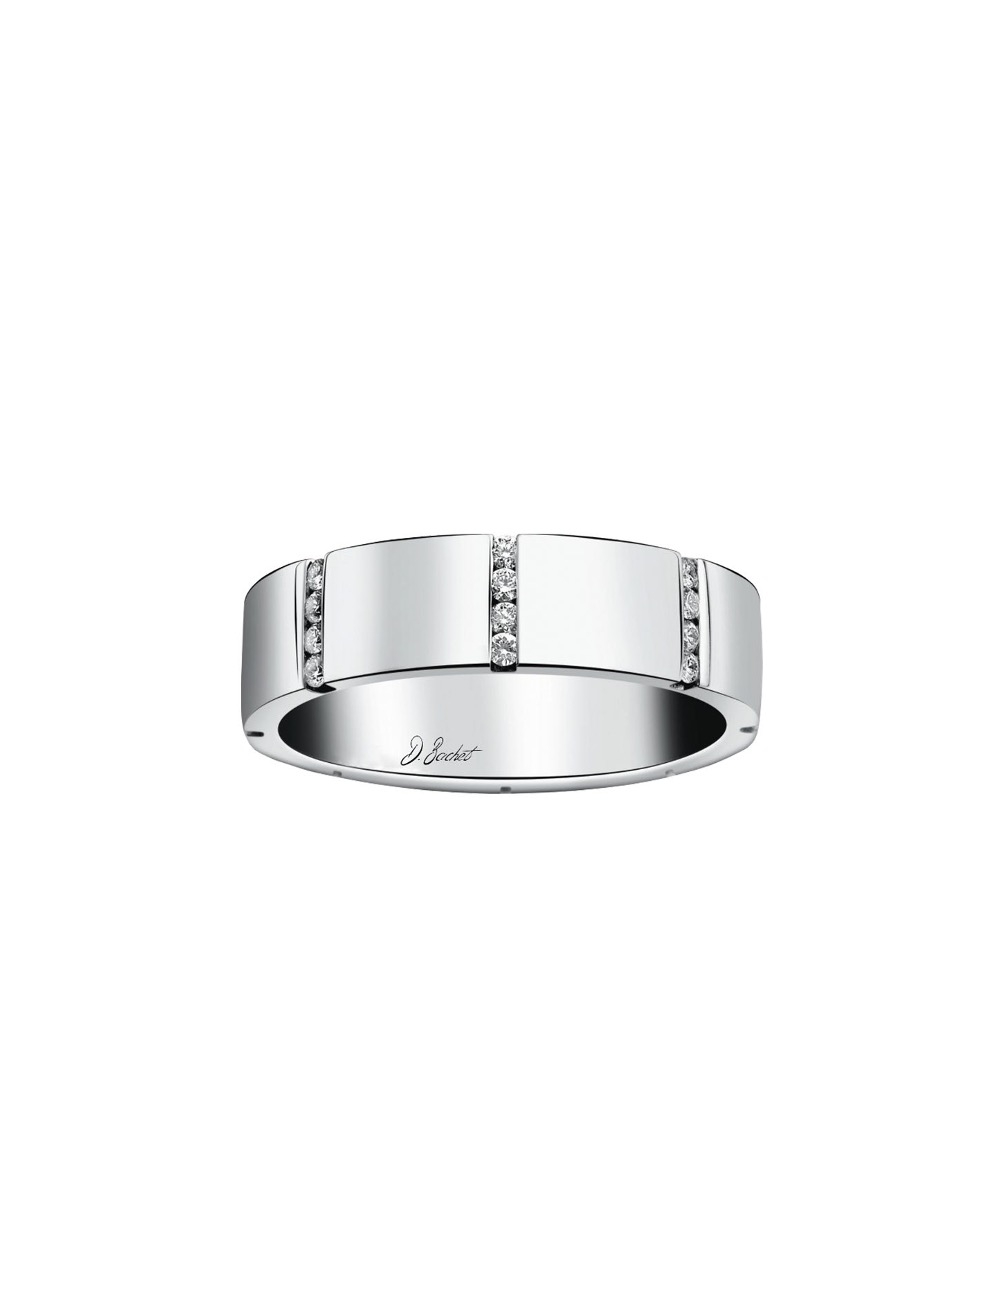 This ring in white diamonds will be for those on the lookout for a bold diamond wedding band